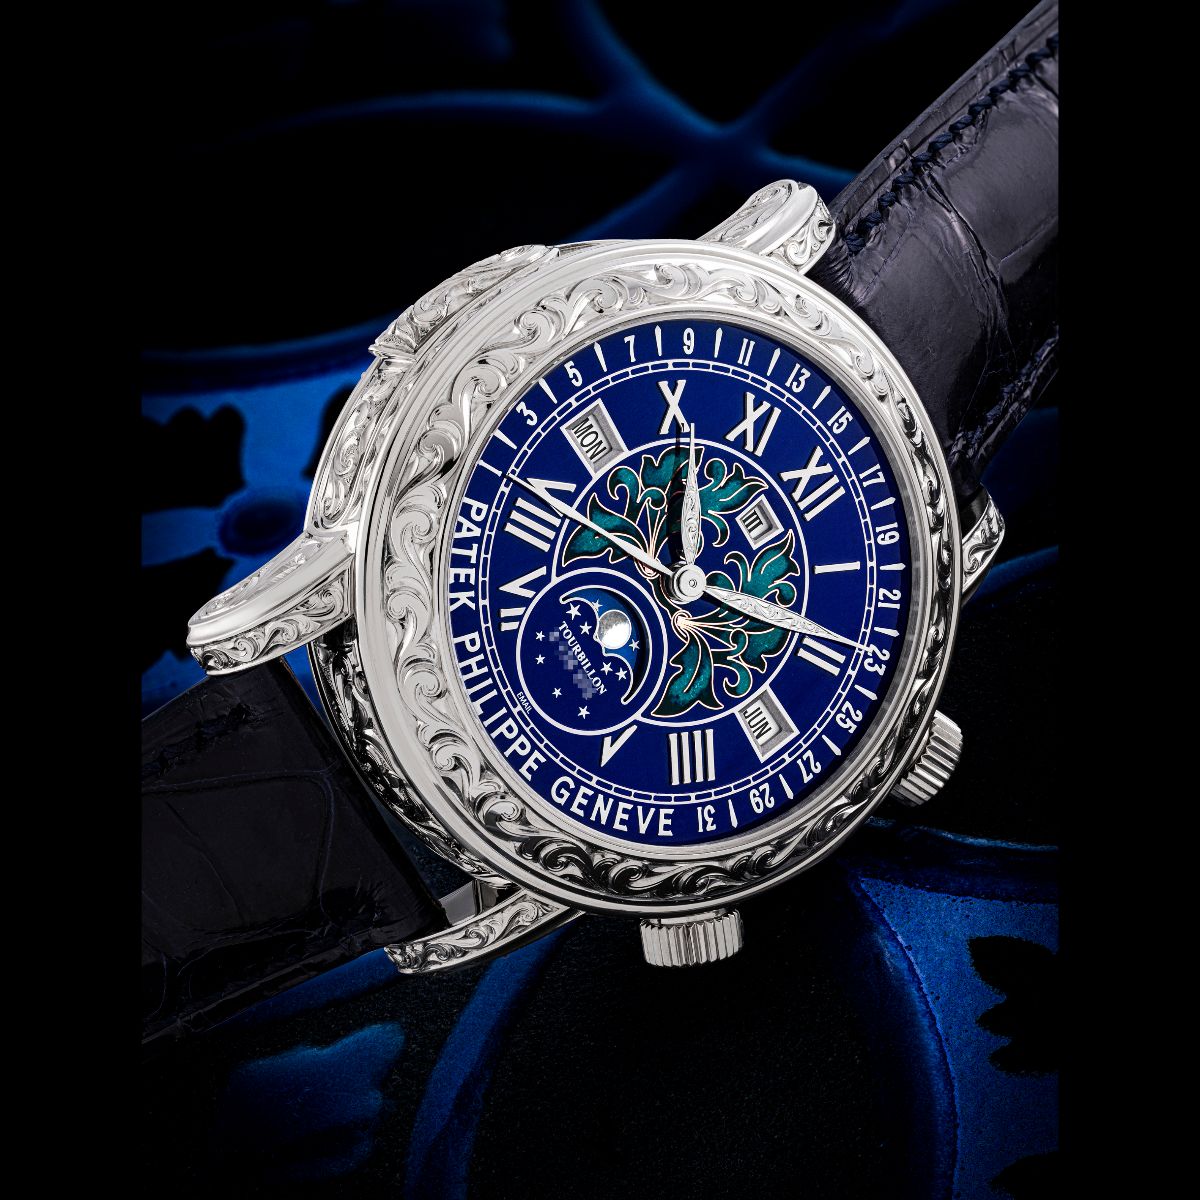 Is It Time to Invest in Watches? How about $5 Million for a Patek Philippe Watch?